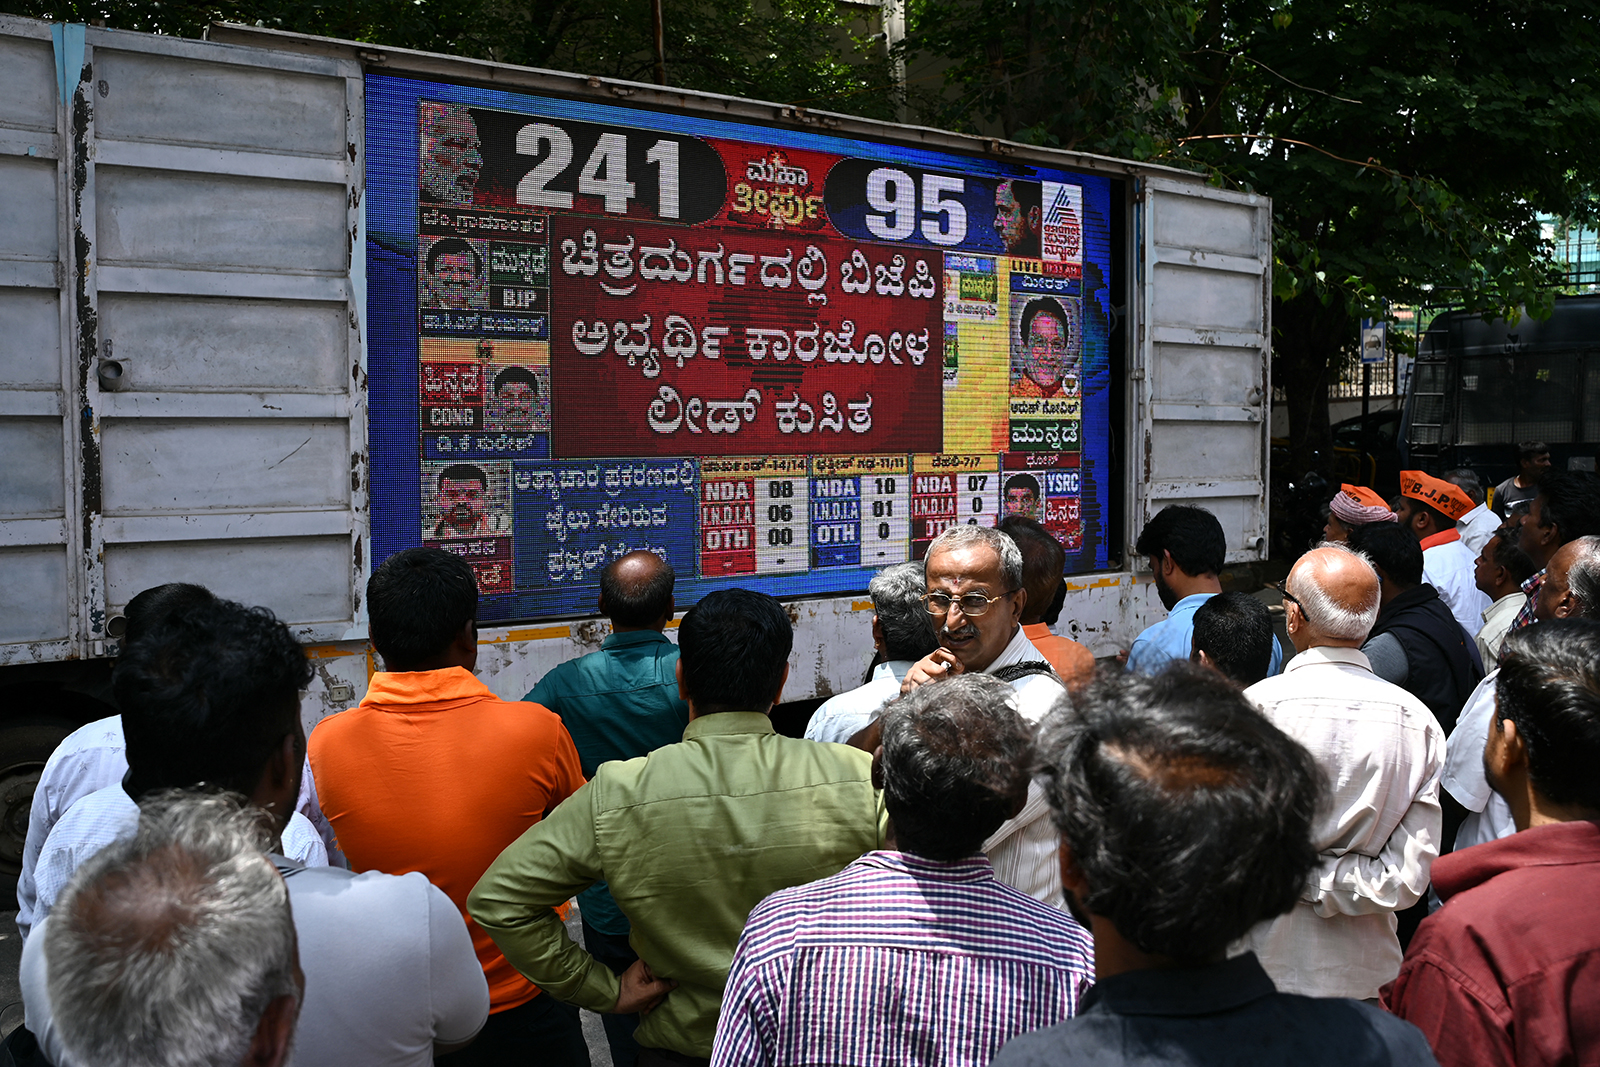 People watch latest vote counting results live on a large screen for India's general election at the Bharatiya Janata Party (BJP) office in Bengaluru, on June 4.